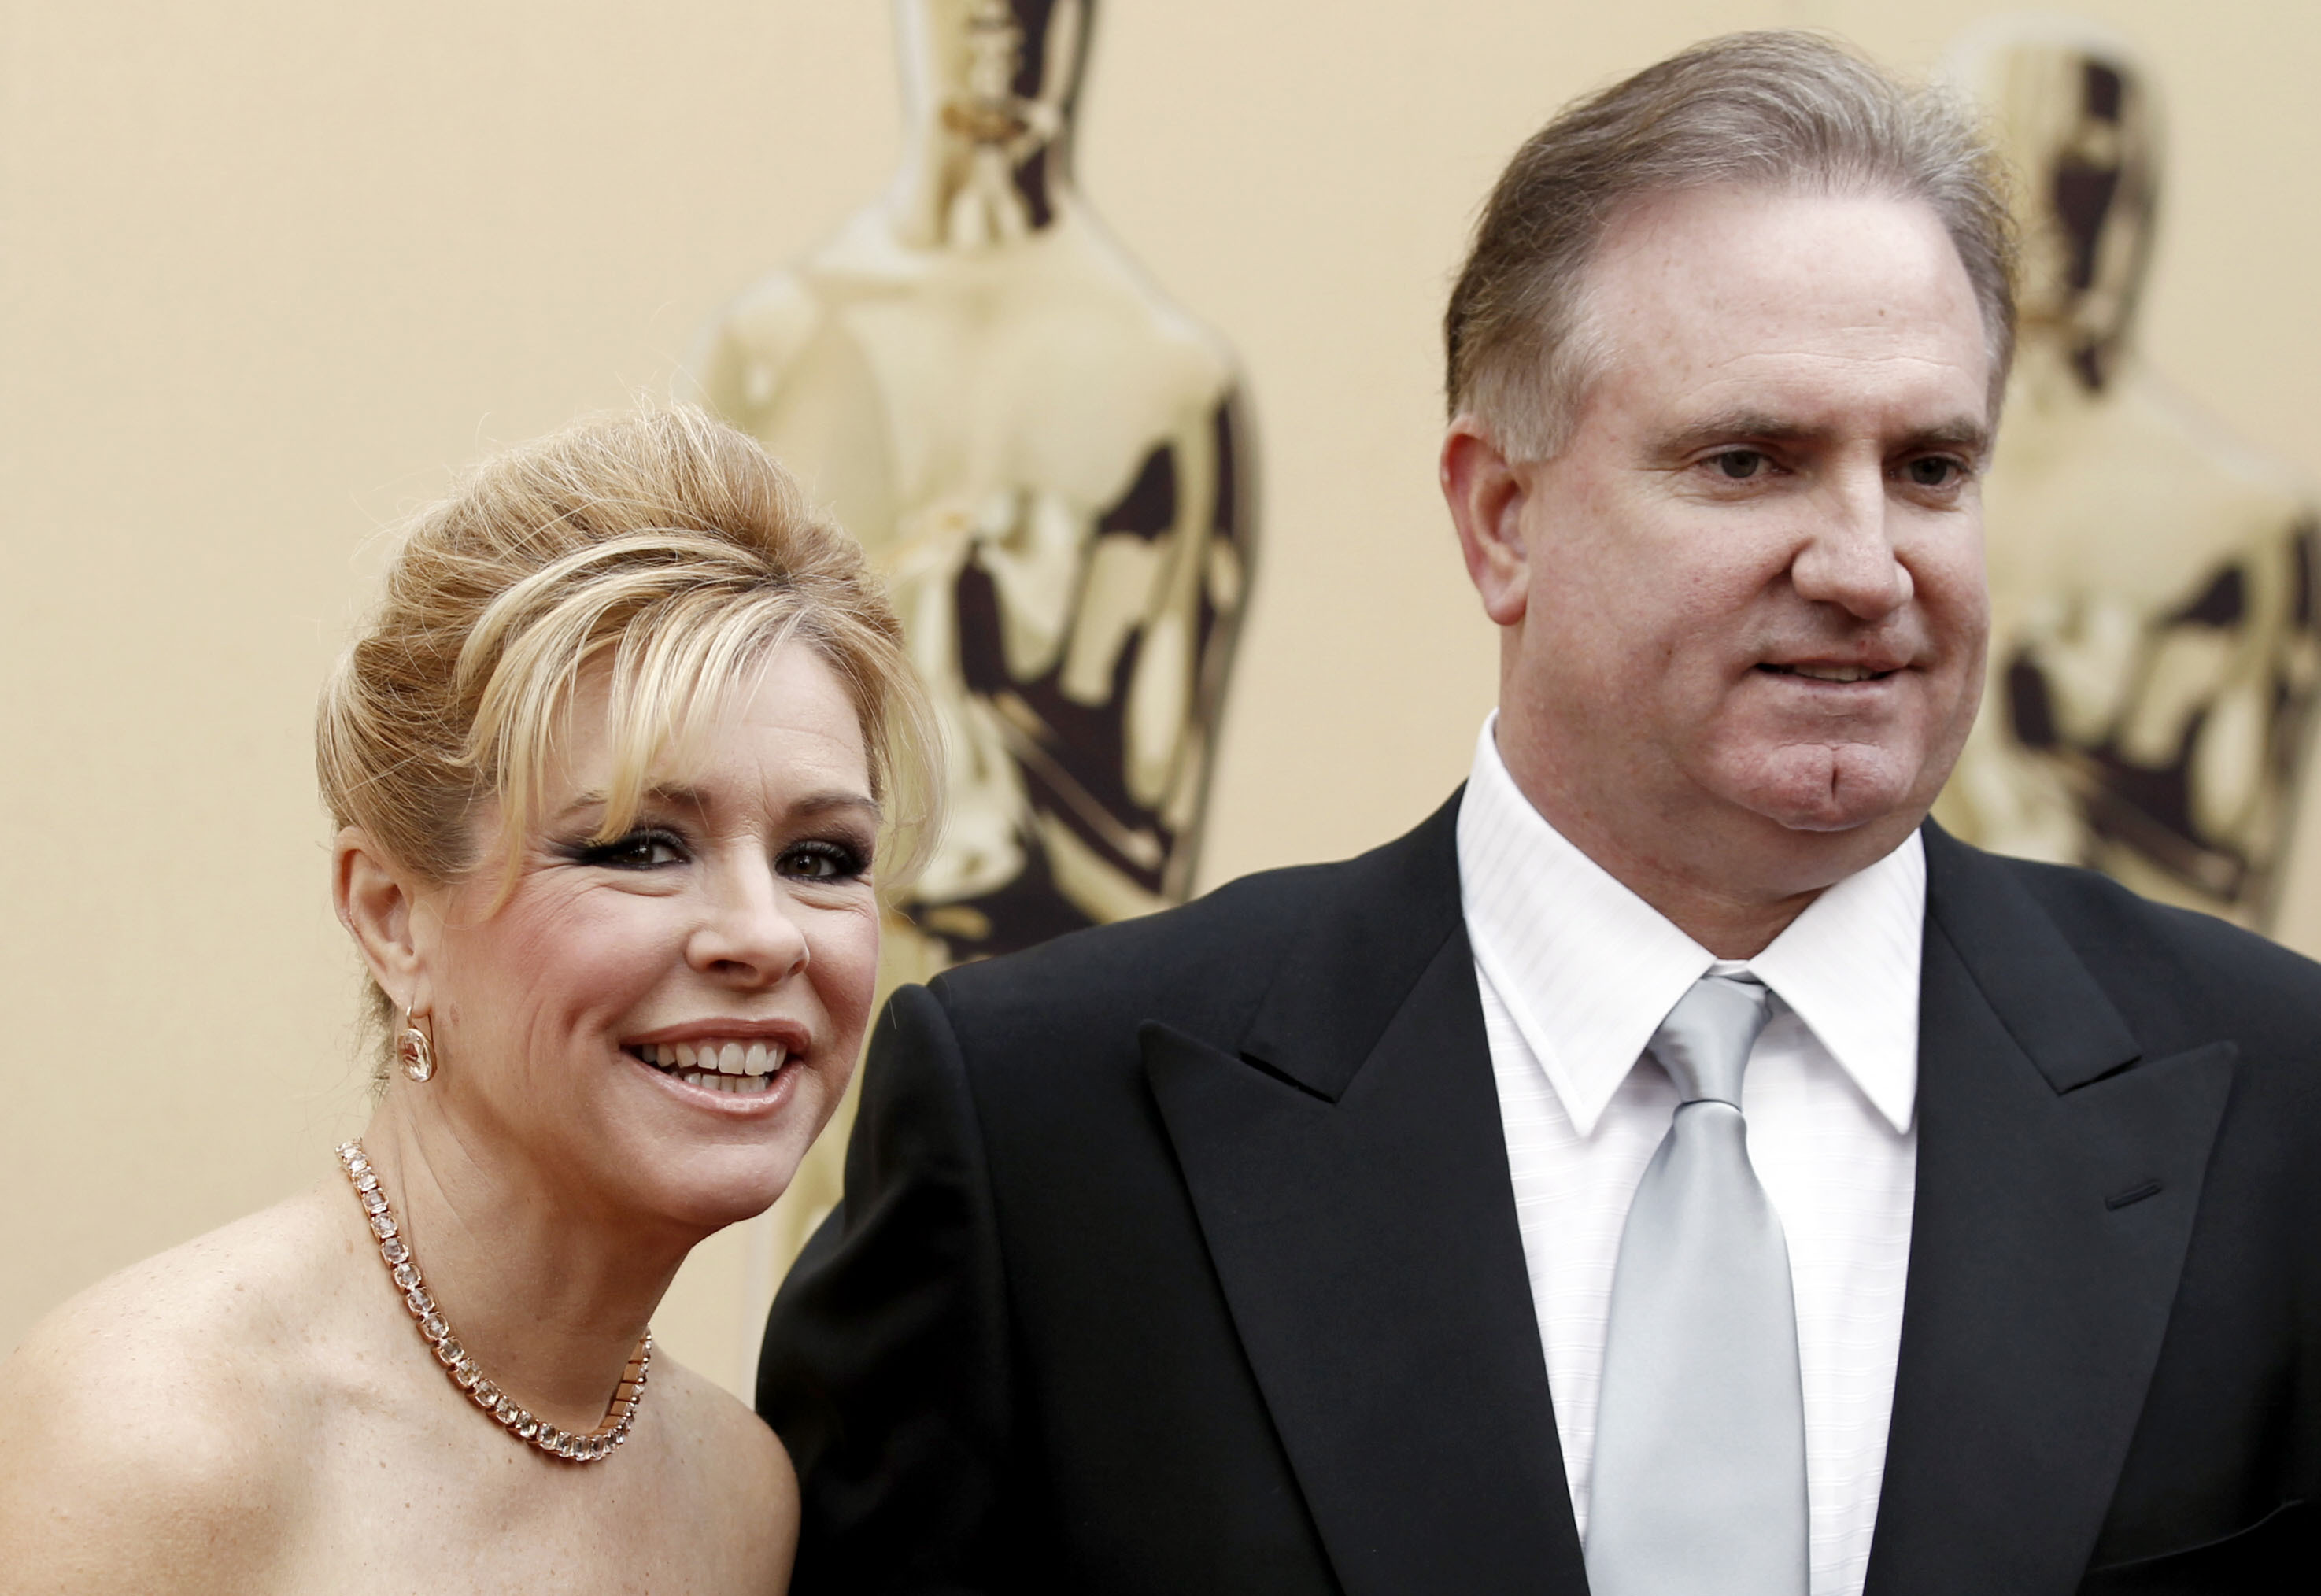 Blind Side' Tuohy family says there was no 'intent to adopt' Michael Oher,  deny profiting off his name